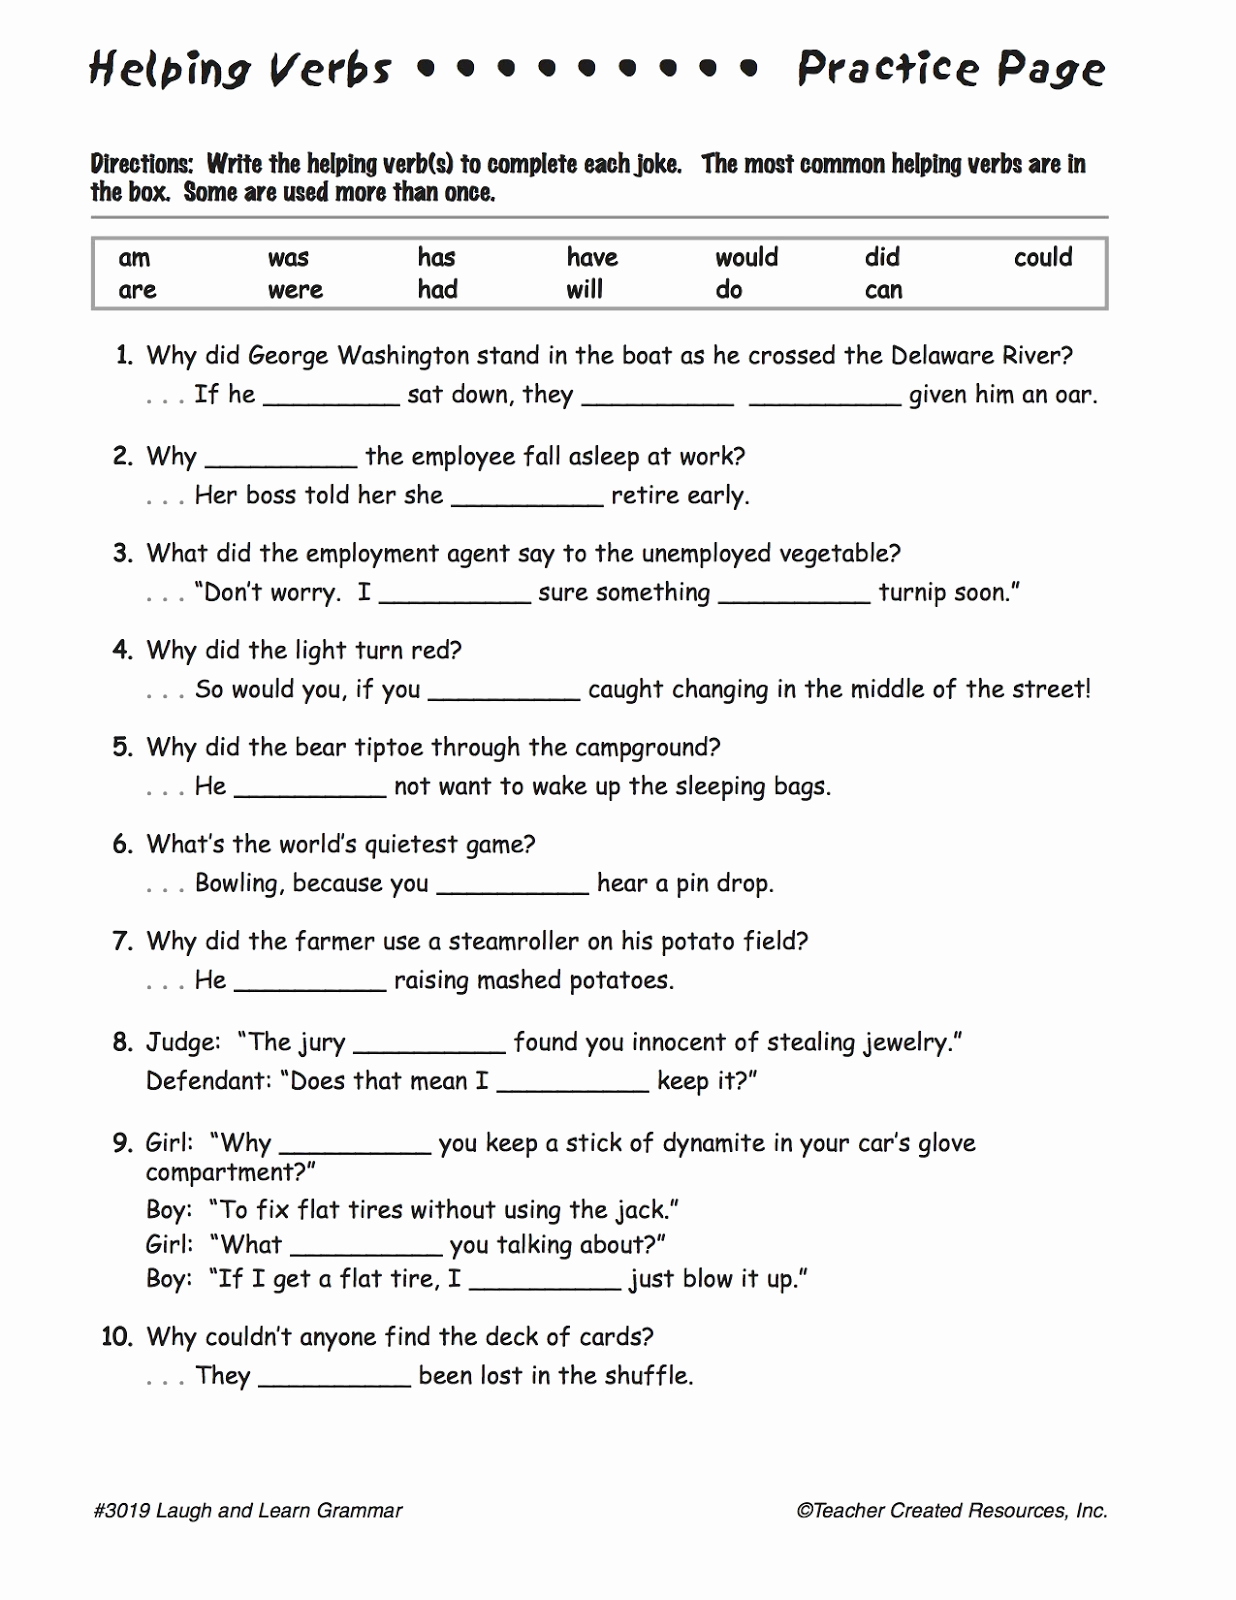 Verbs Worksheets for Middle School Best Of Linking Verbs Worksheets Middle School